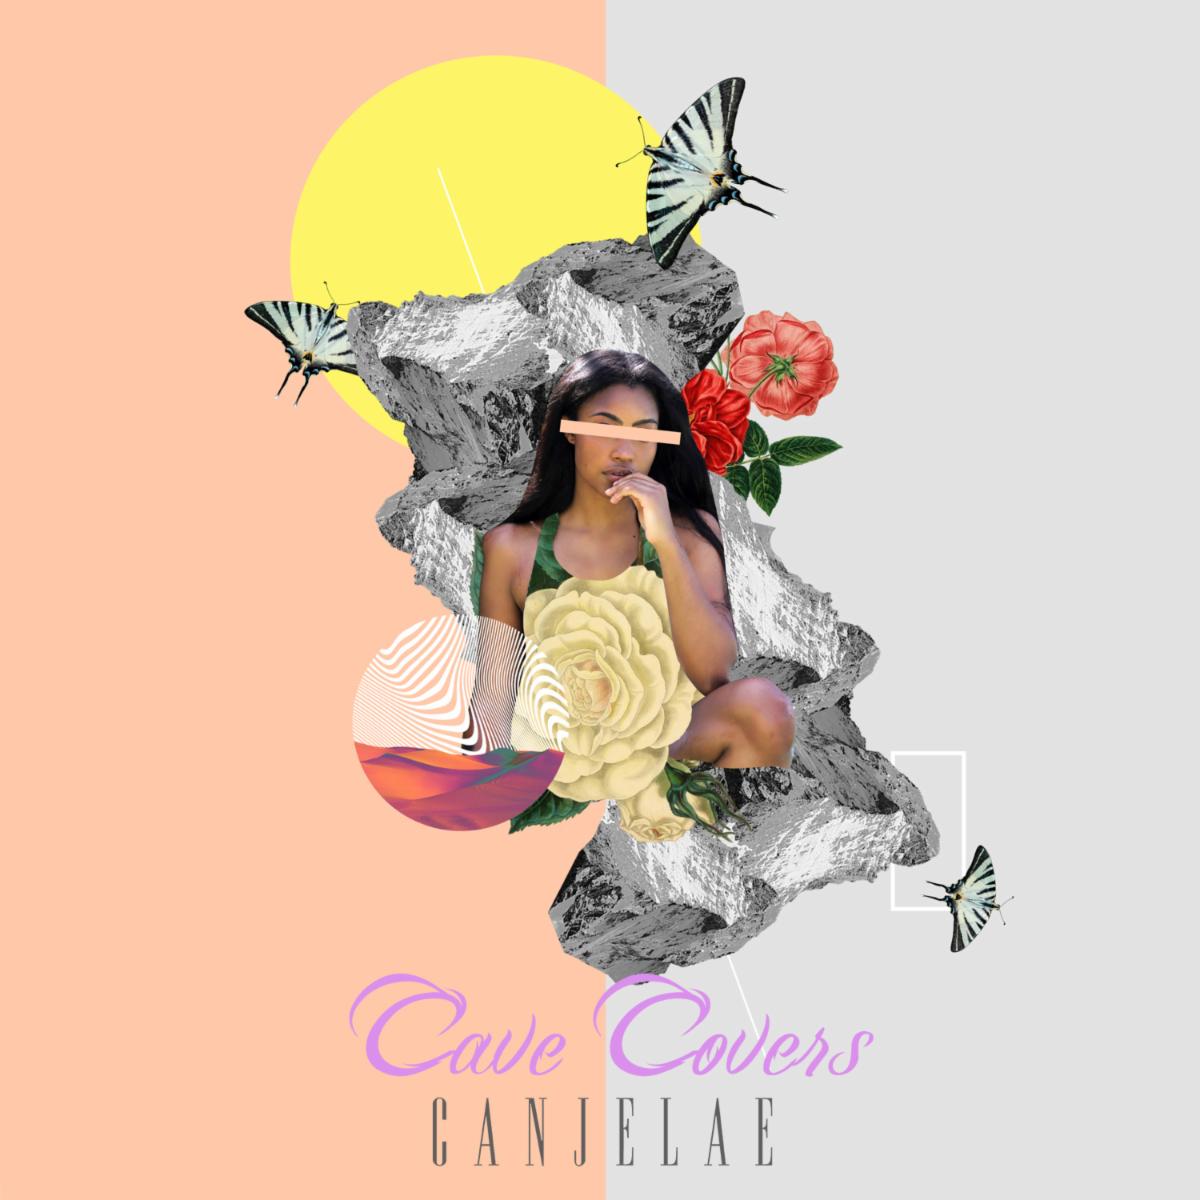 Canjelae Releases "Cave Covers" EP with Appearances from Kevin Ross & Jacob Latimore